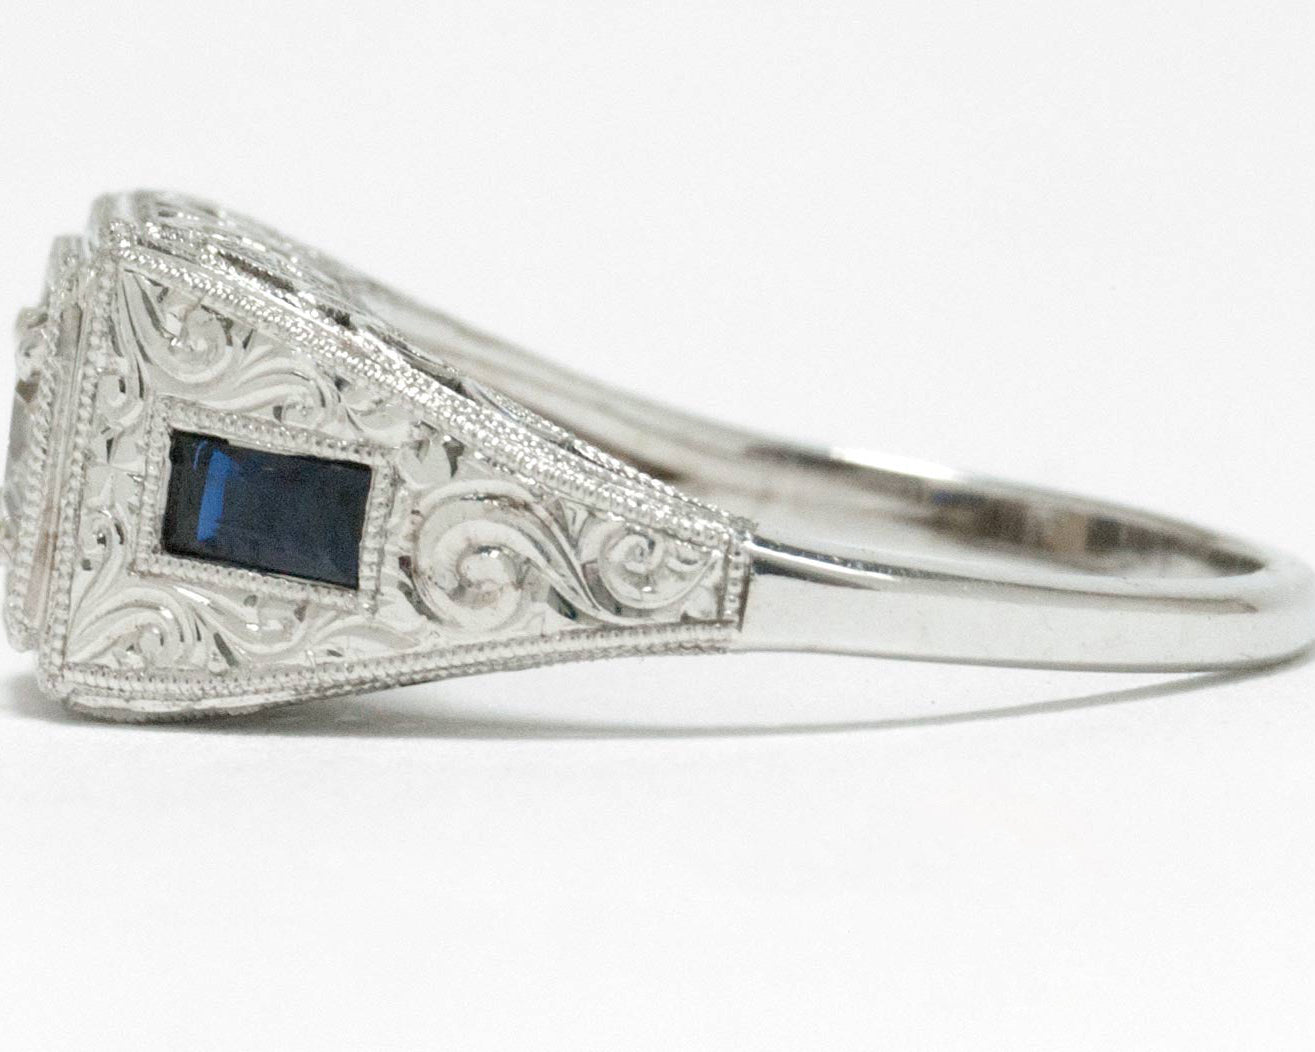 Engraved white gold scrolls on the side of this diamond blue sapphire engagement ring.